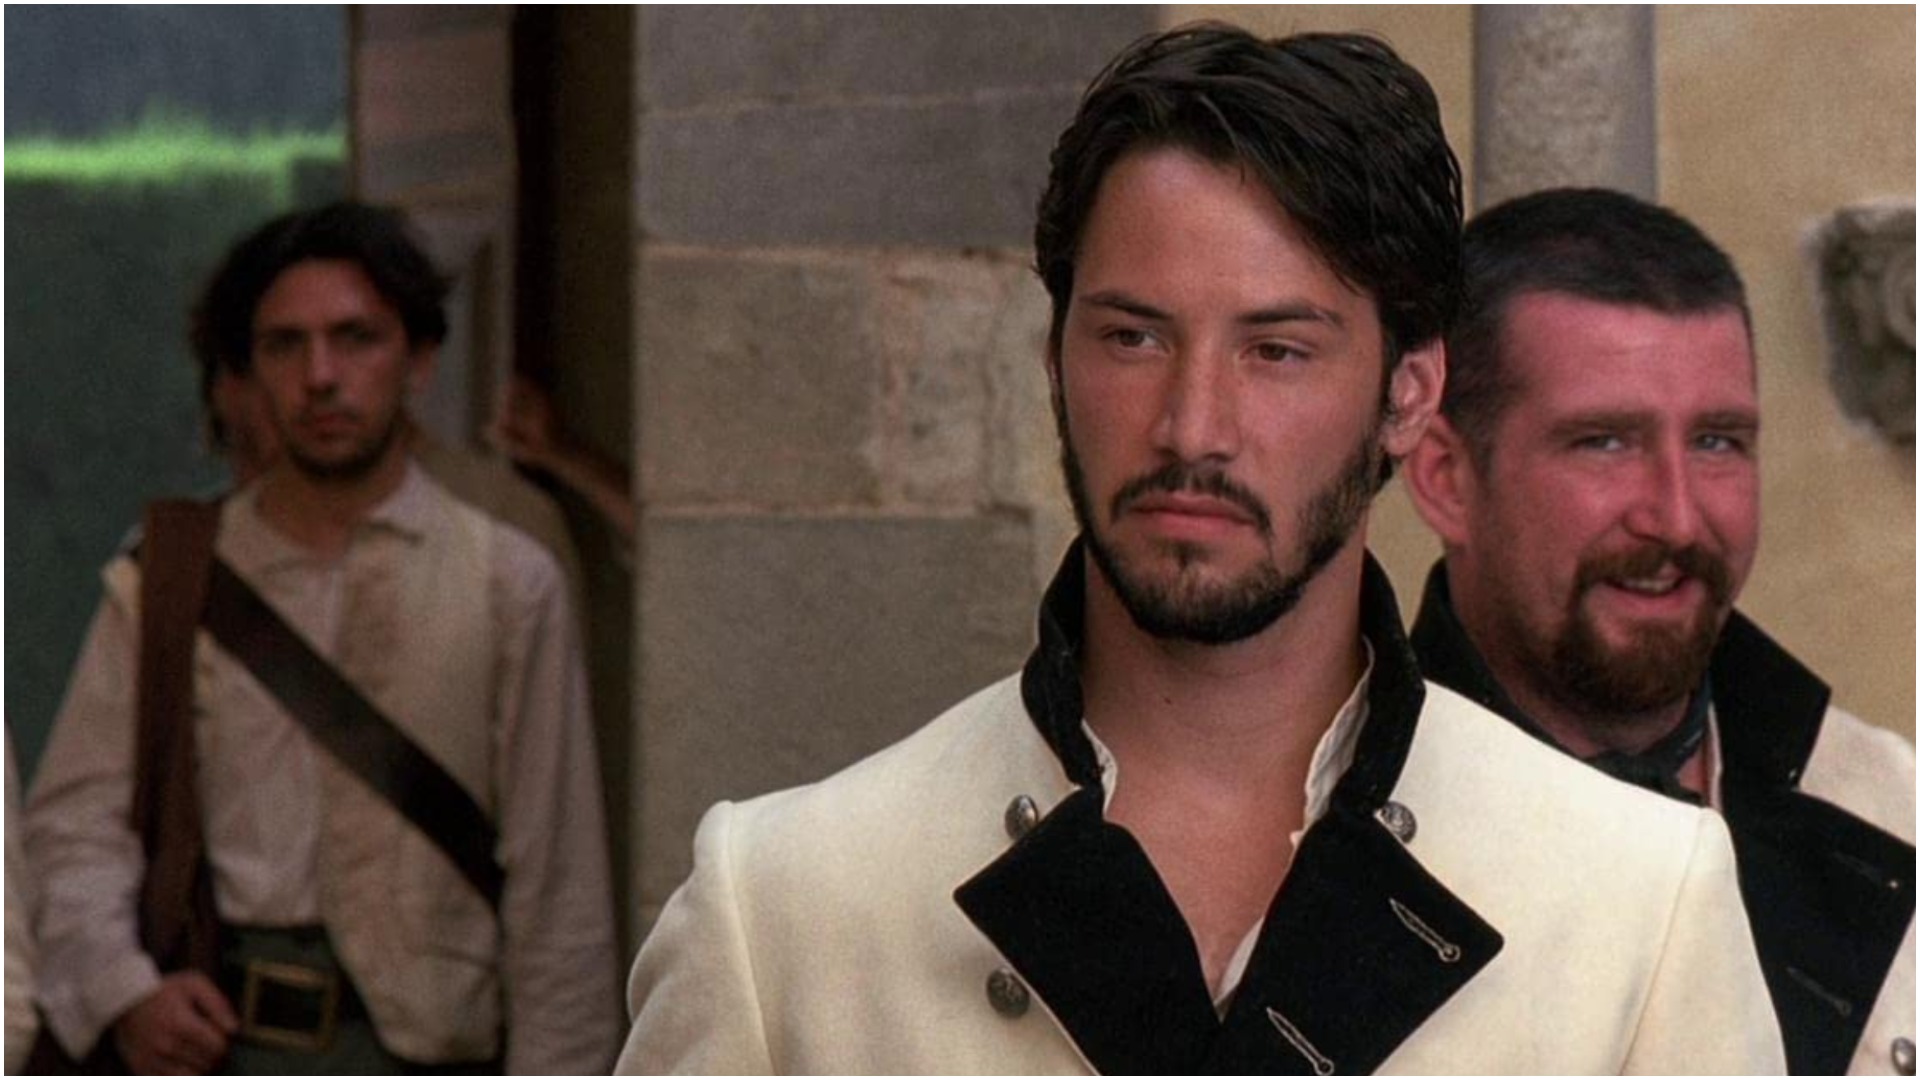 Keanu Reeves in Much Ado About Nothing